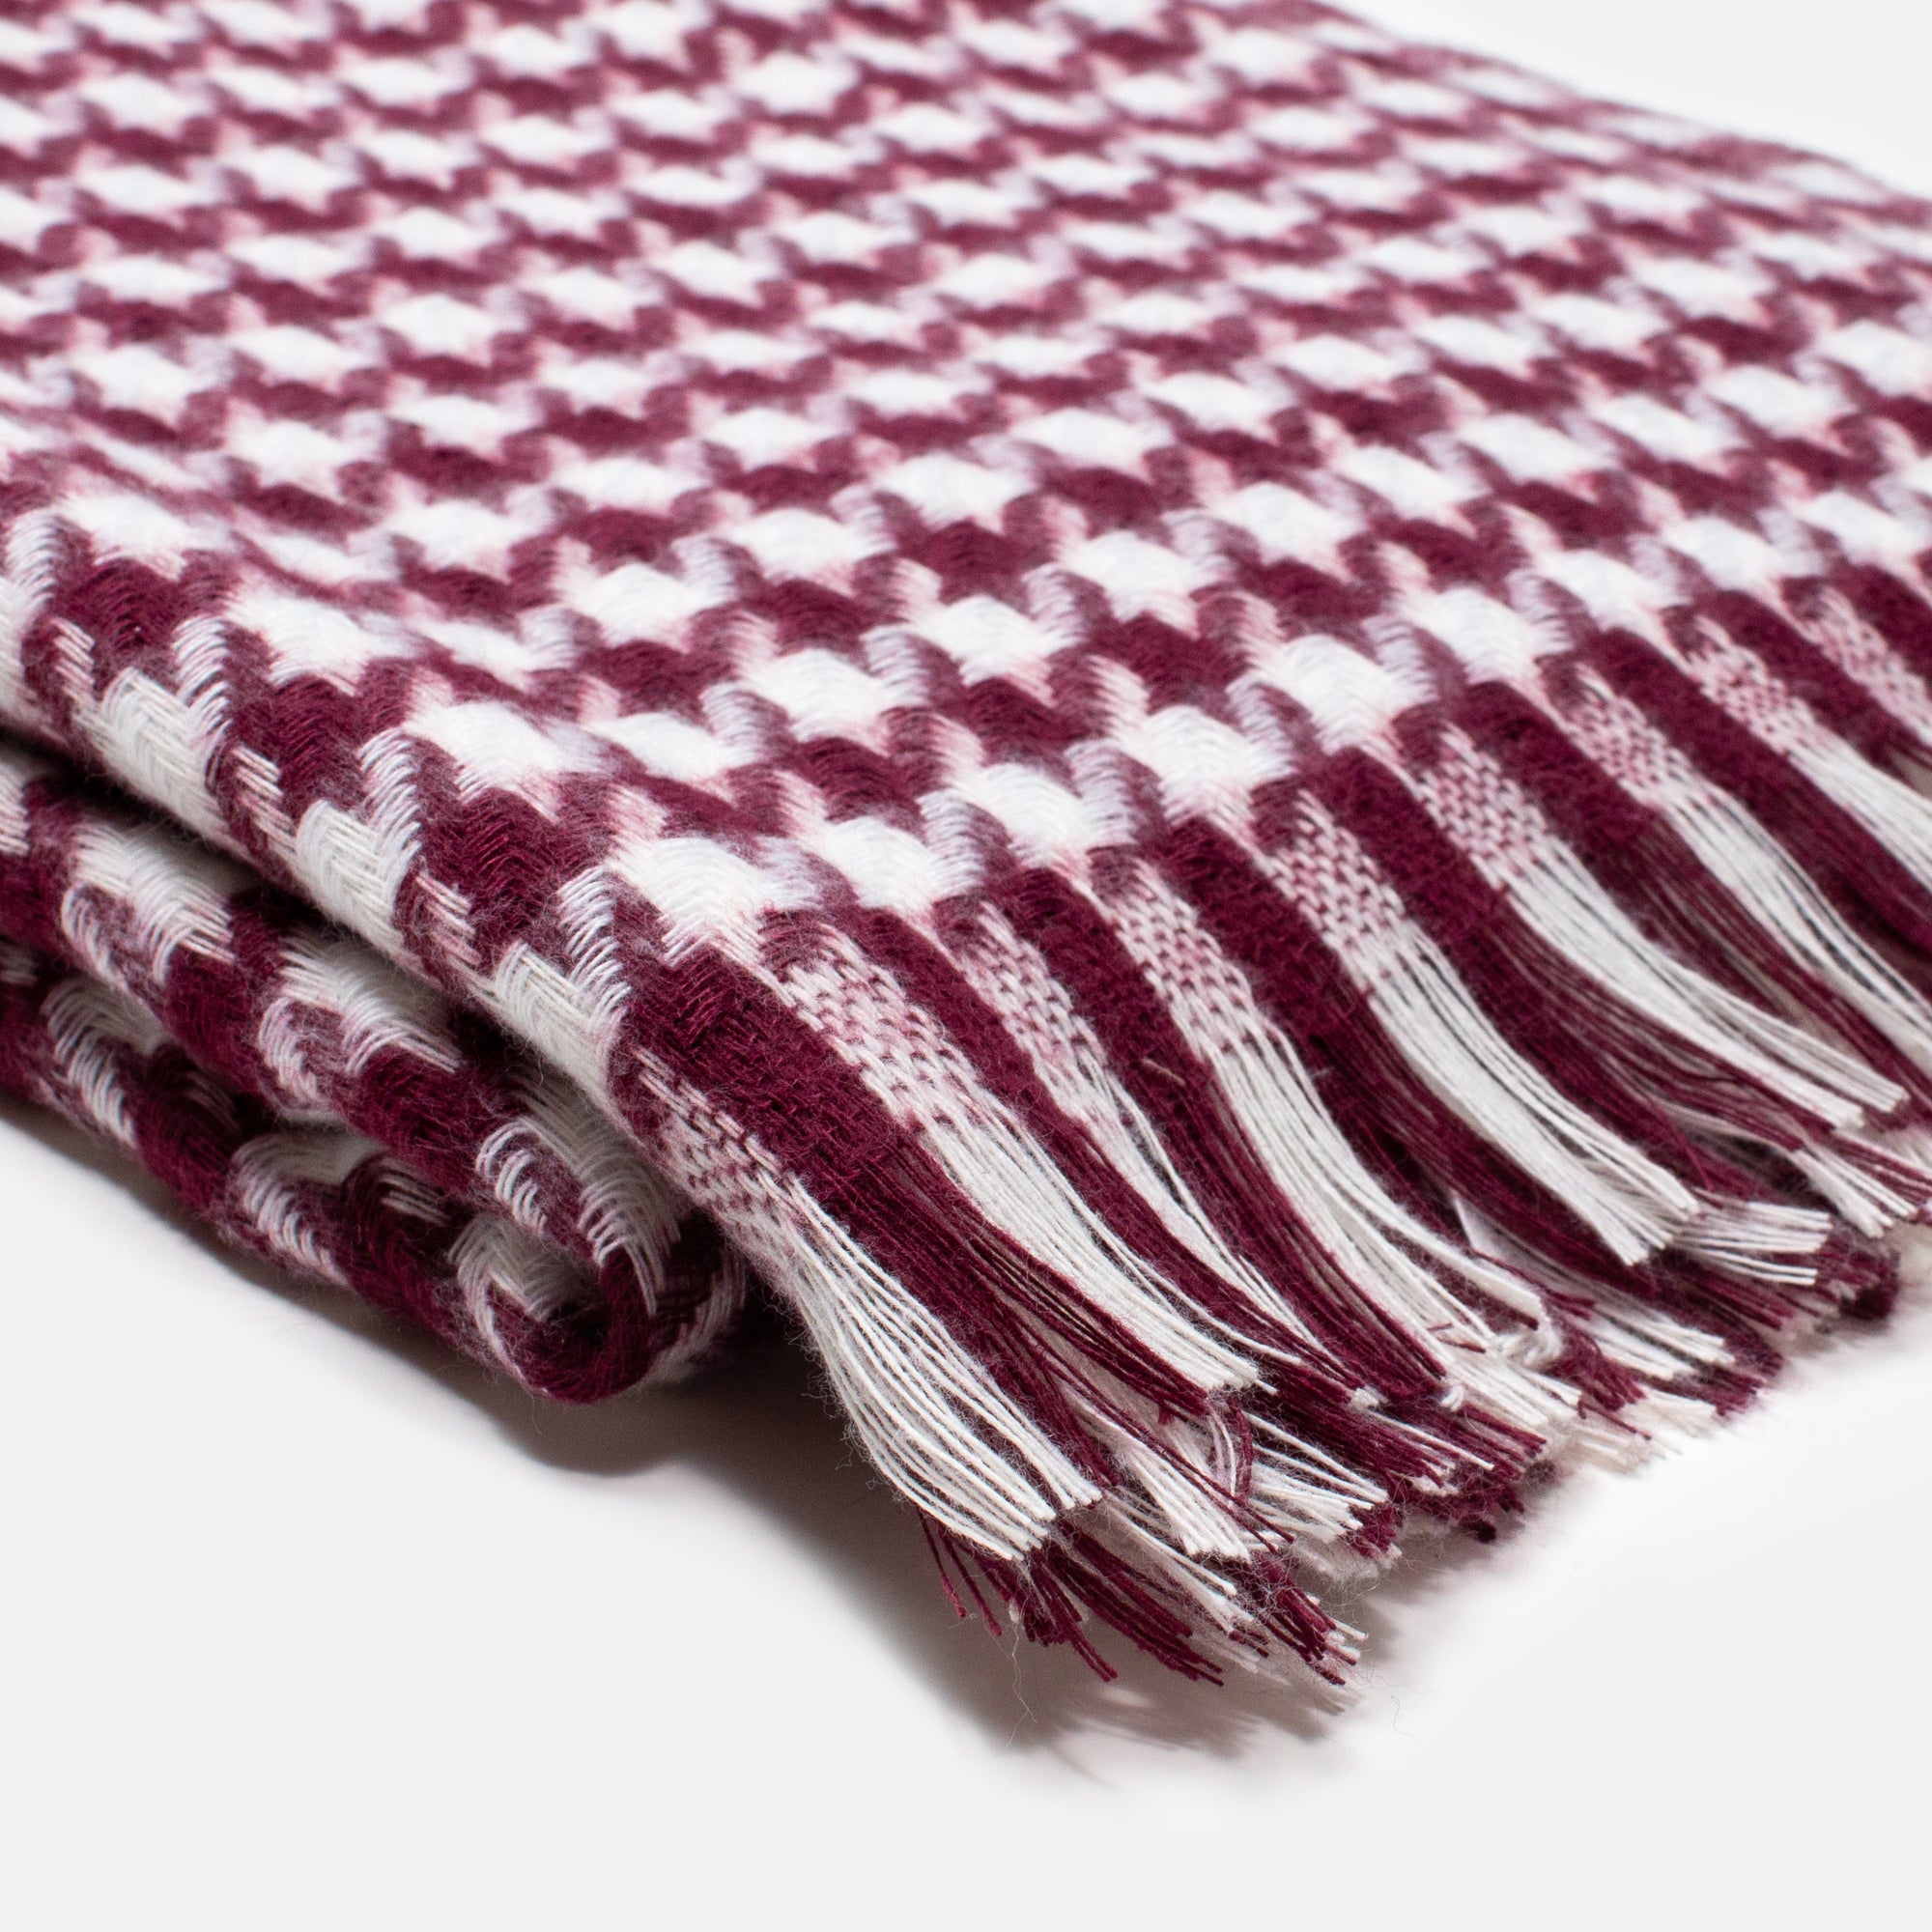 Burgundy and white houndstooth scarf